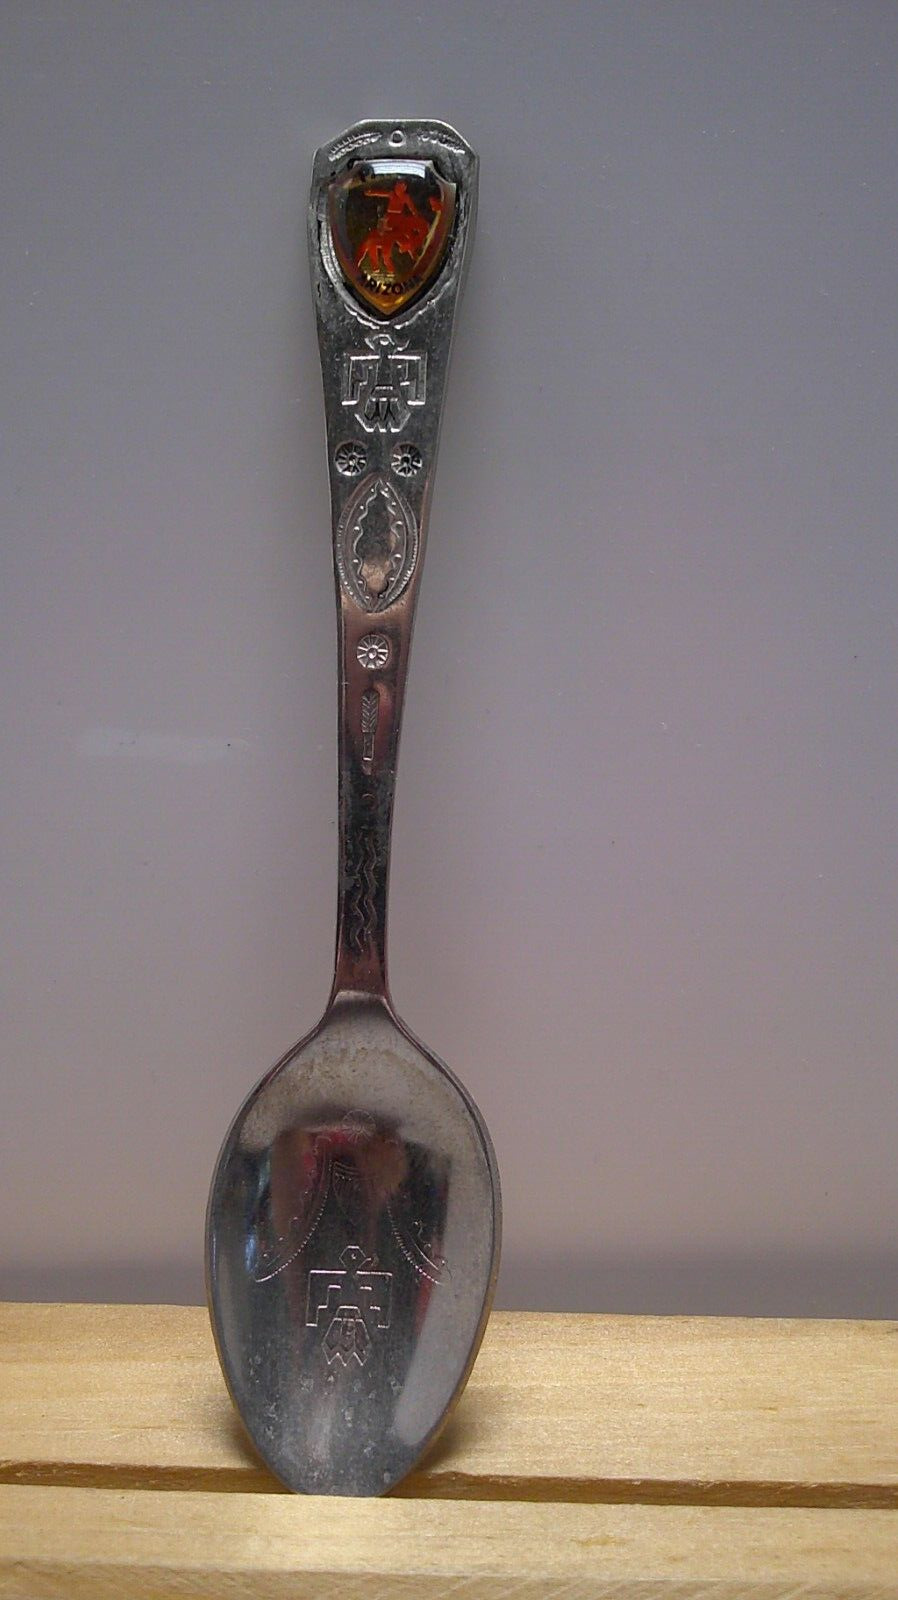 Payson Arizona Cowboy Rodeo Collectors Spoon Made in Japan